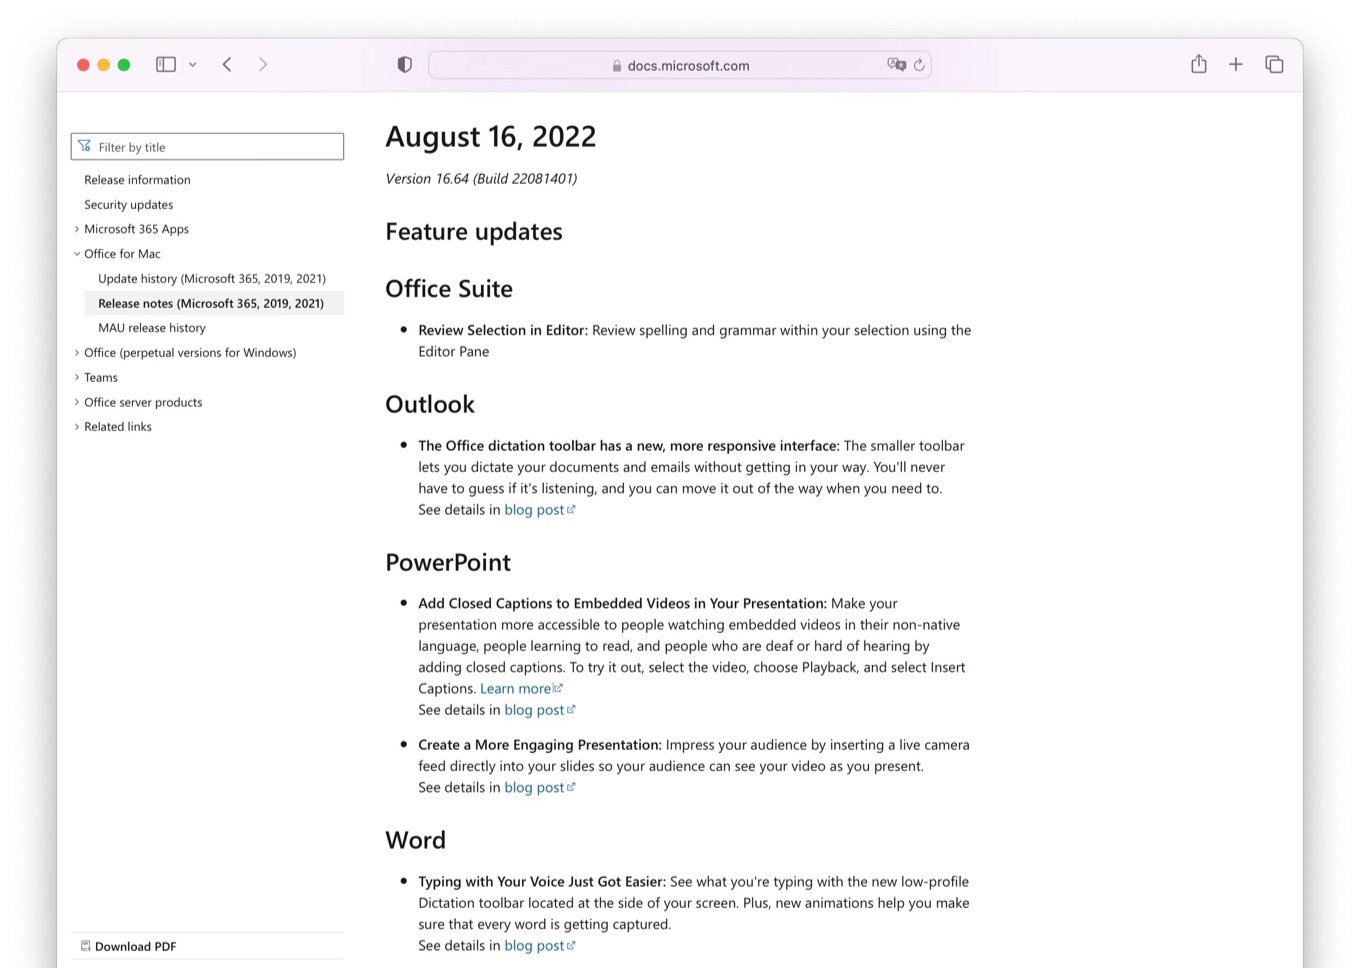 Microsoft Office for Mac August 16 2022 update